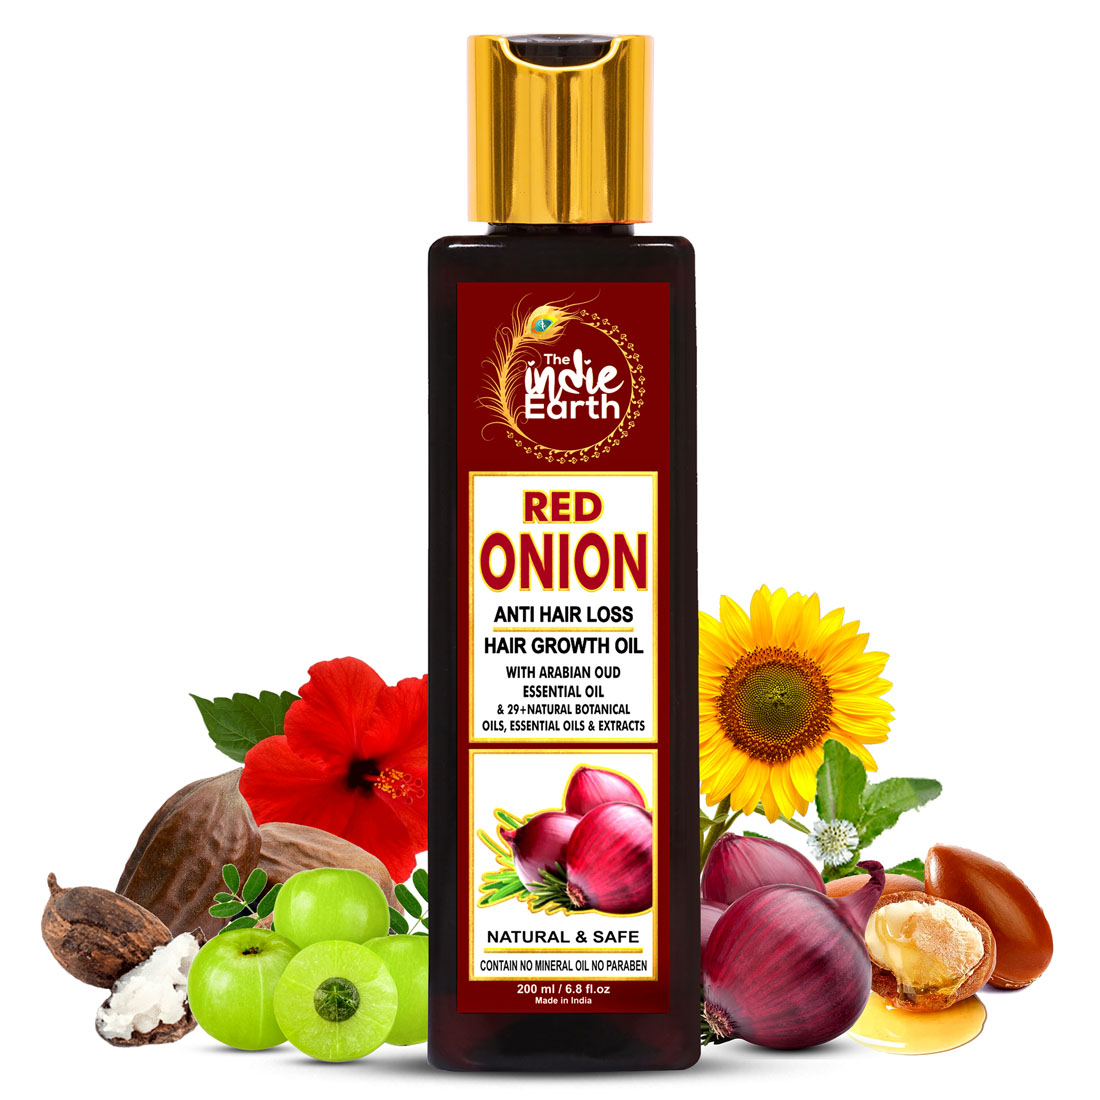 Onion Oil: Buy The Indie Earth Red Onion Hair Oil for Hair Growth